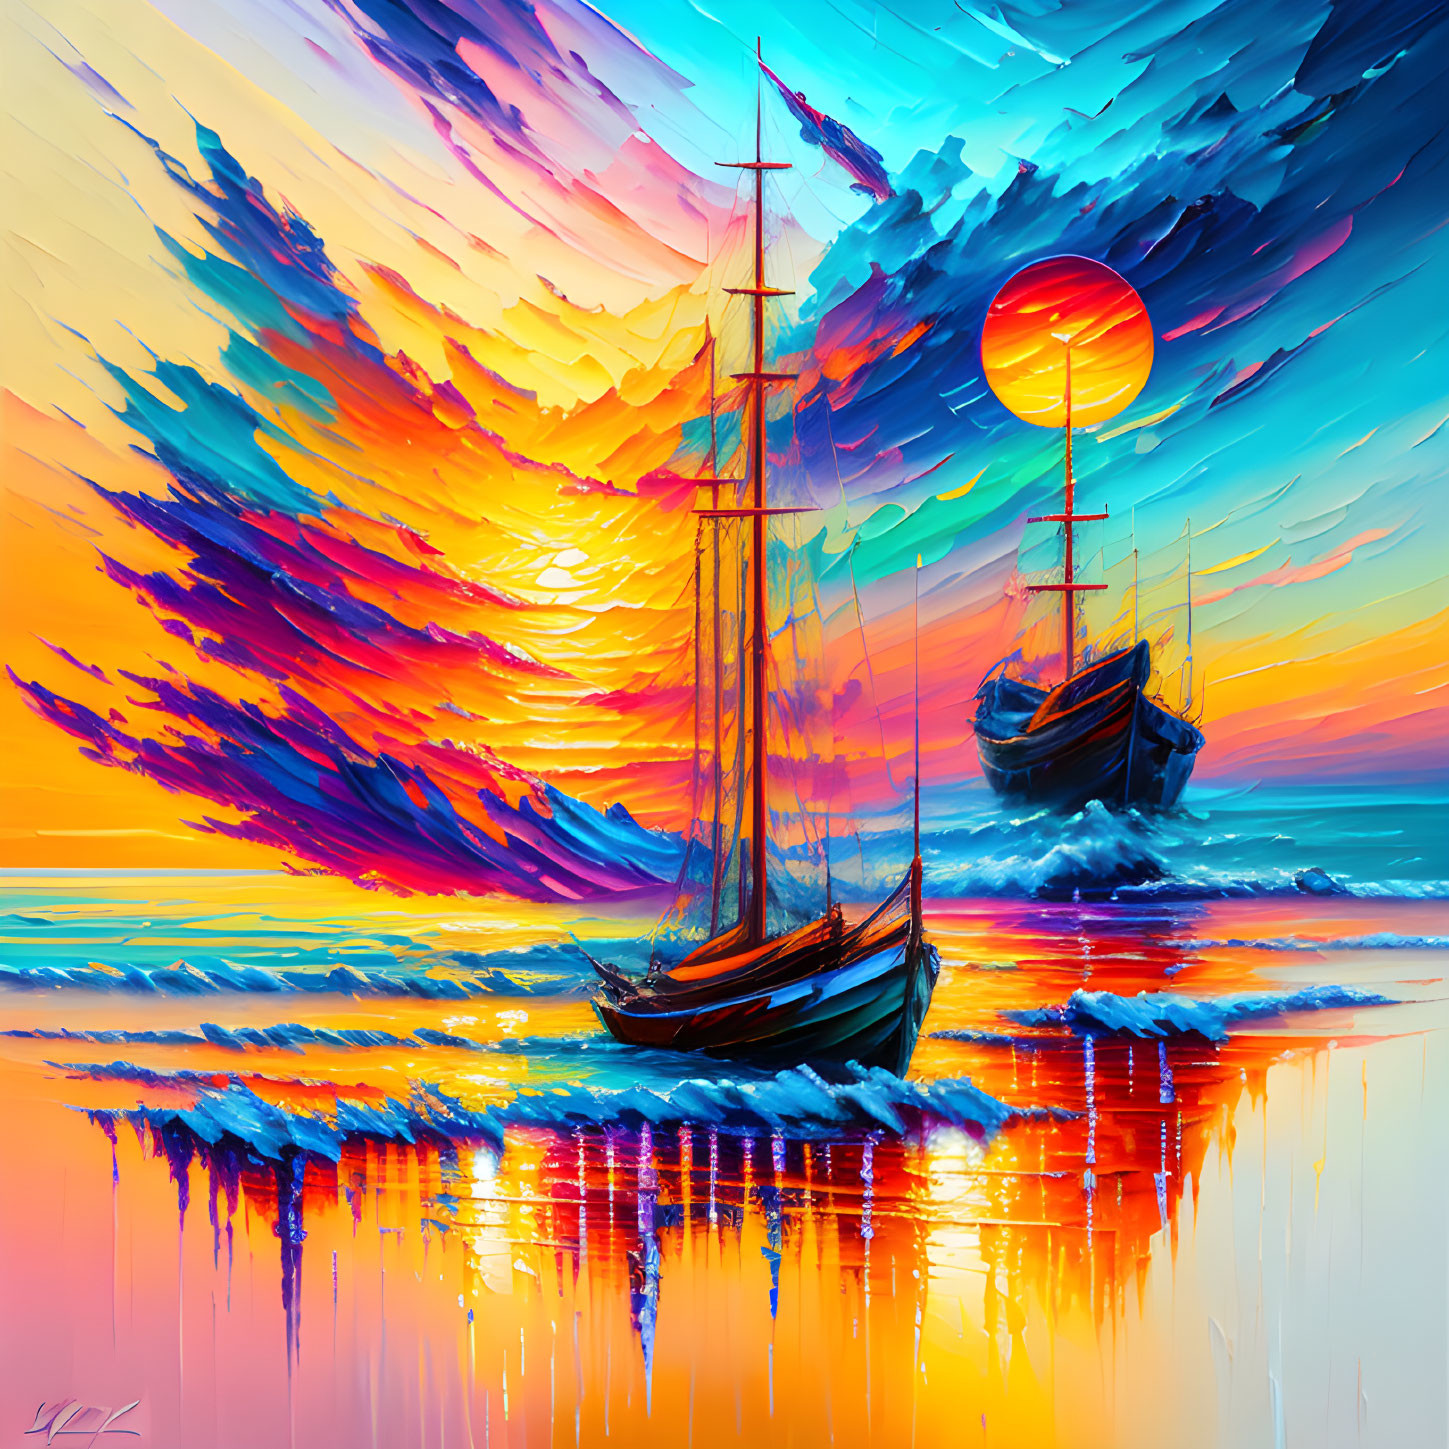 Colorful sunset seascape painting with sailing ships on reflective ocean